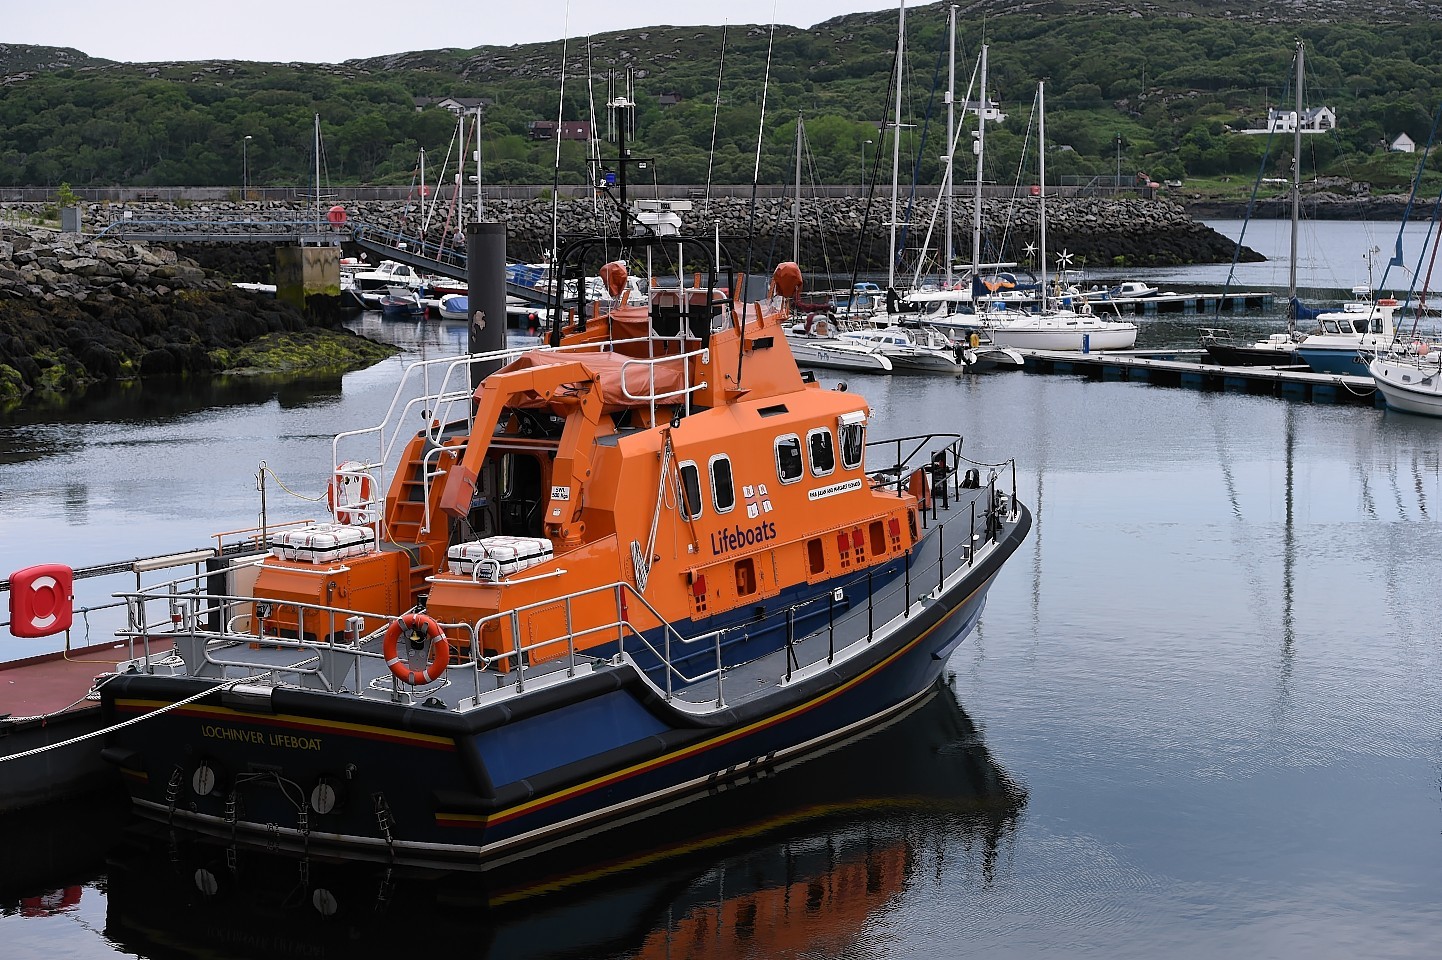 The Lochinver Lifeboat.